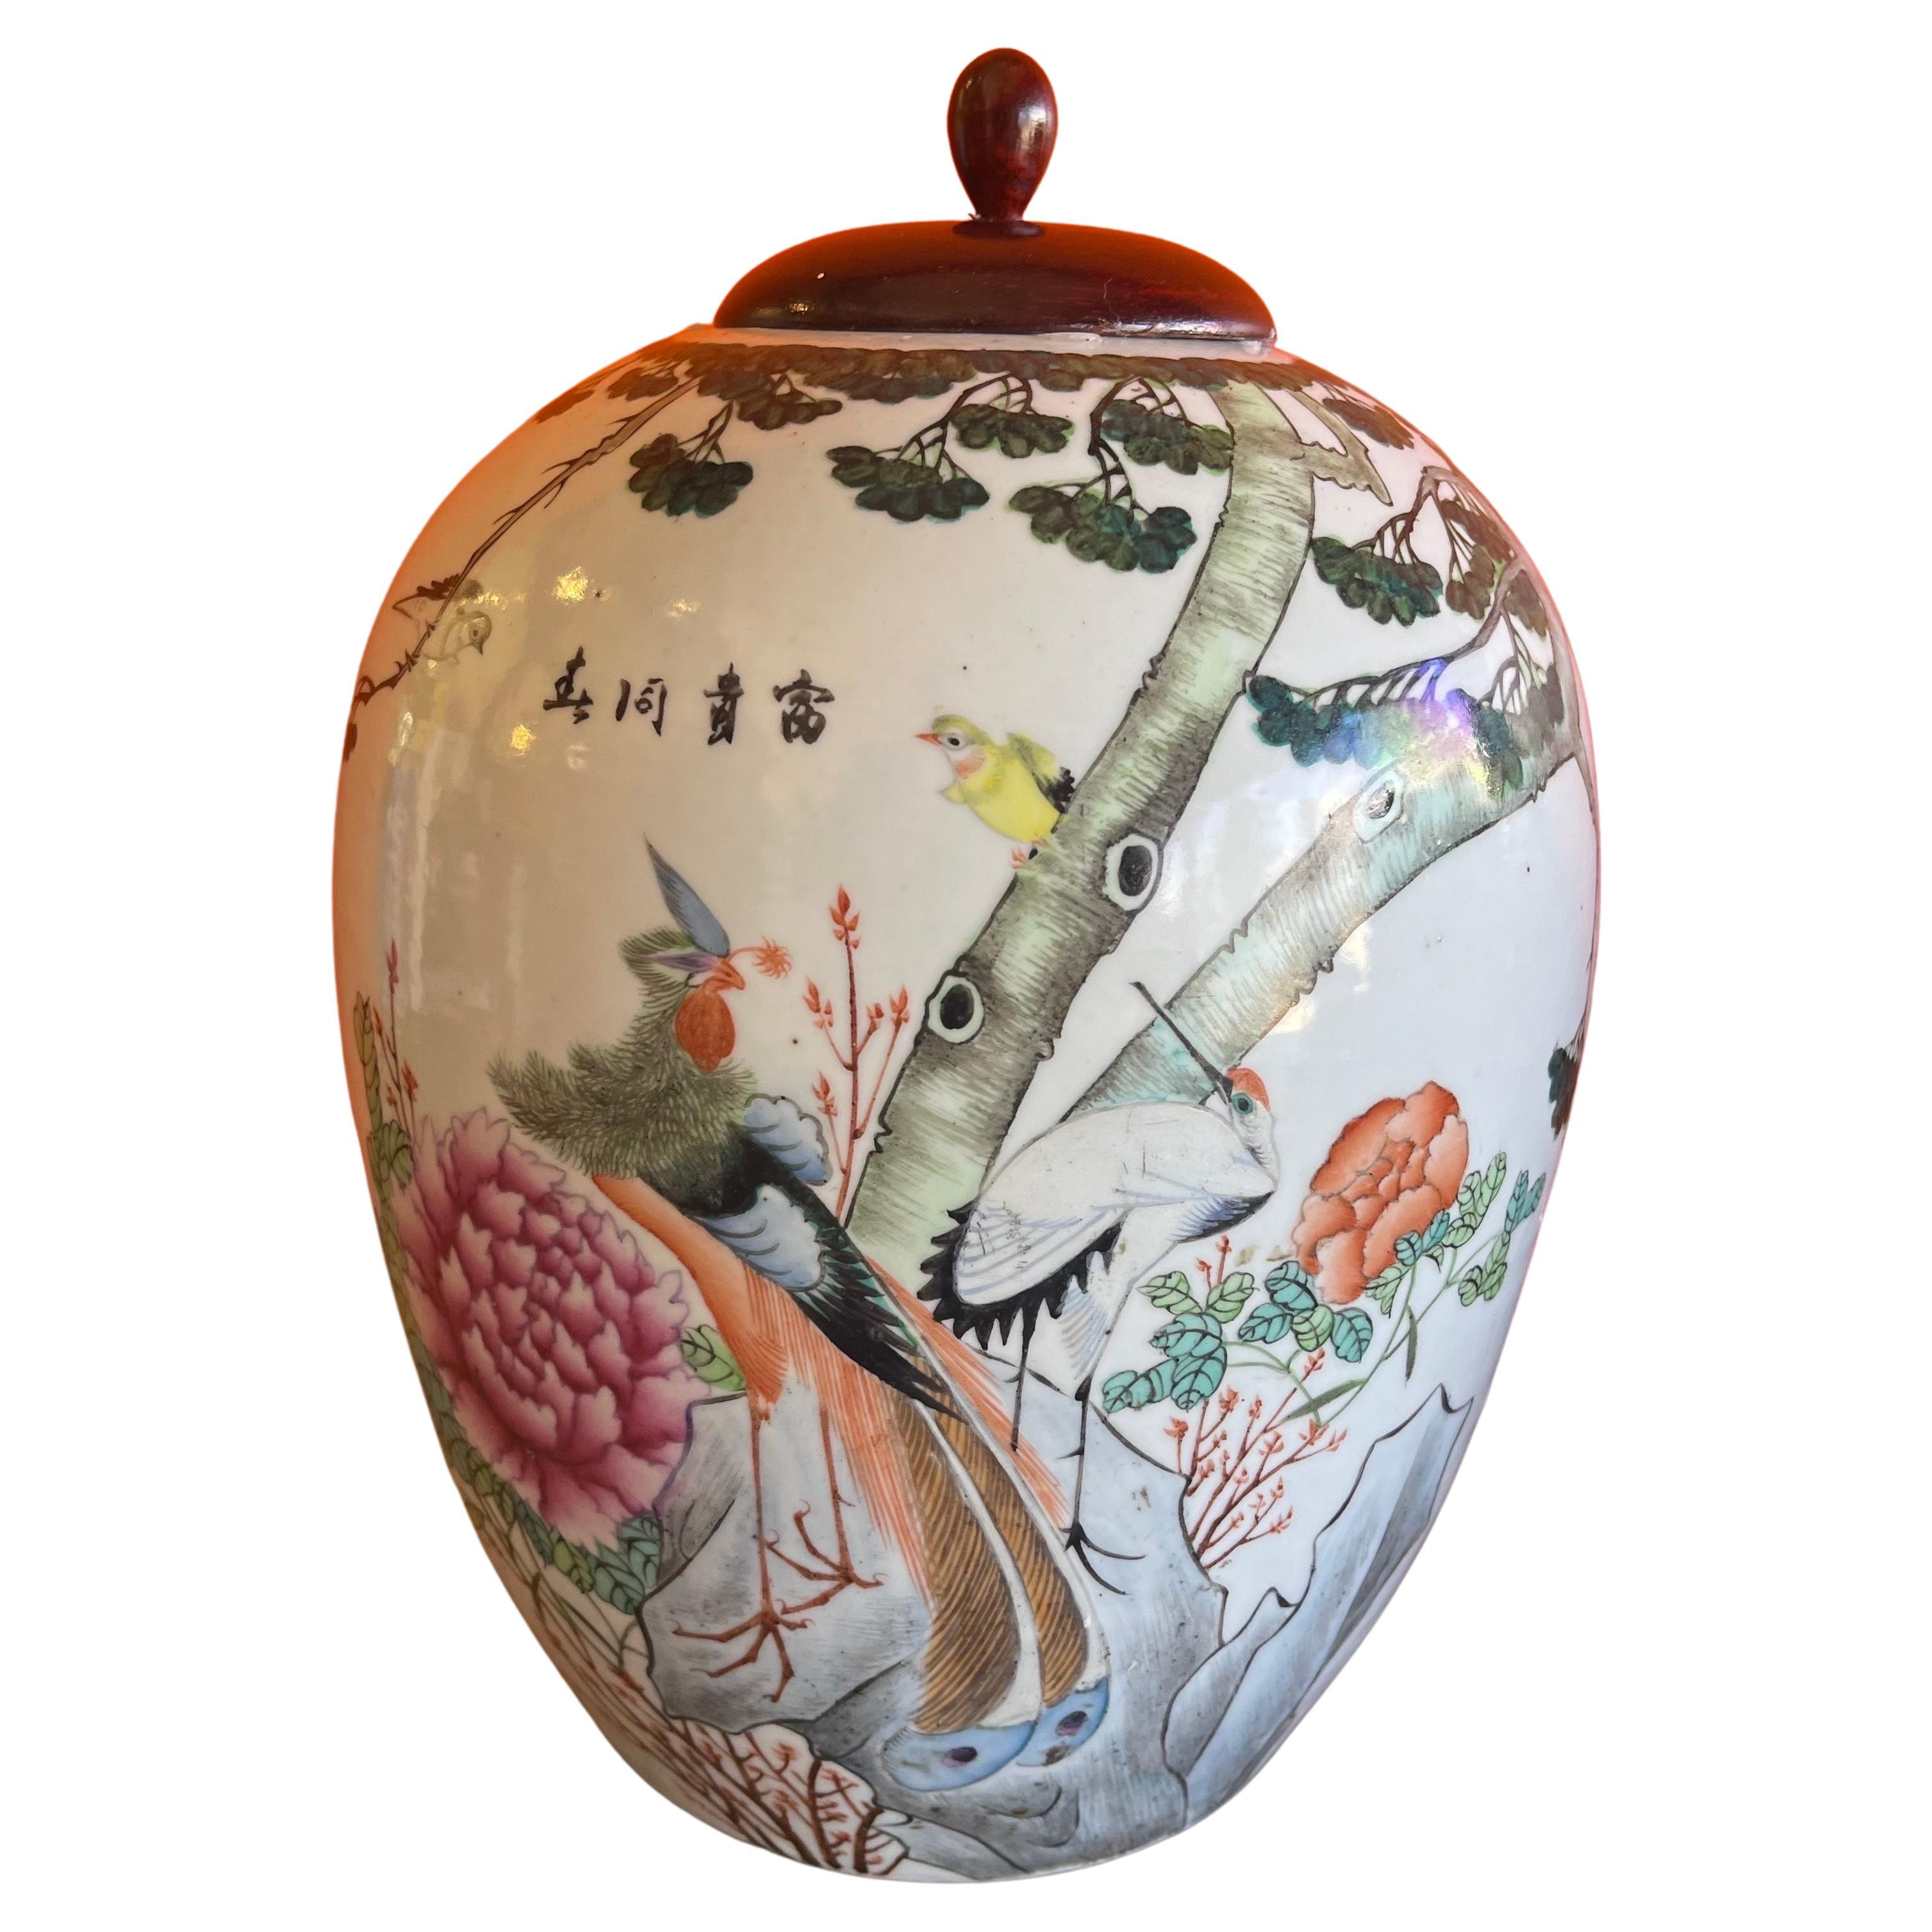 Beautiful ceramic hand painted Chinese ginger jar with wood lid from the Republic period, circa 1920s. The jar is in very good condition with no chips or cracks and measure 9.5